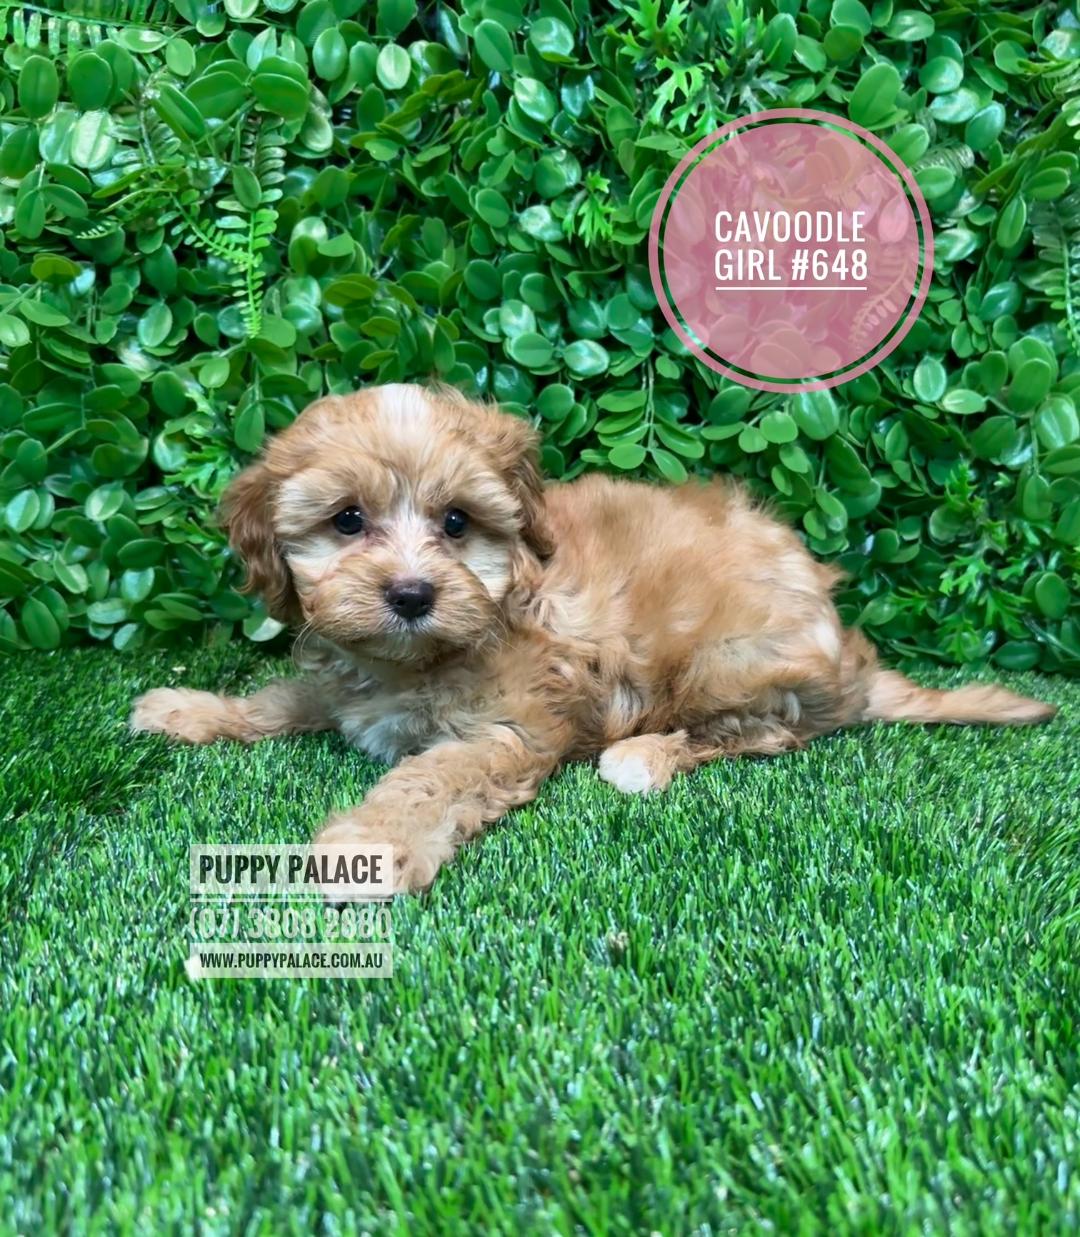 I HAVE NOW FOUND MY FOREVER HOME – Cavoodle / Cavapoo (Cavalier X Toy Poodle) – Girl